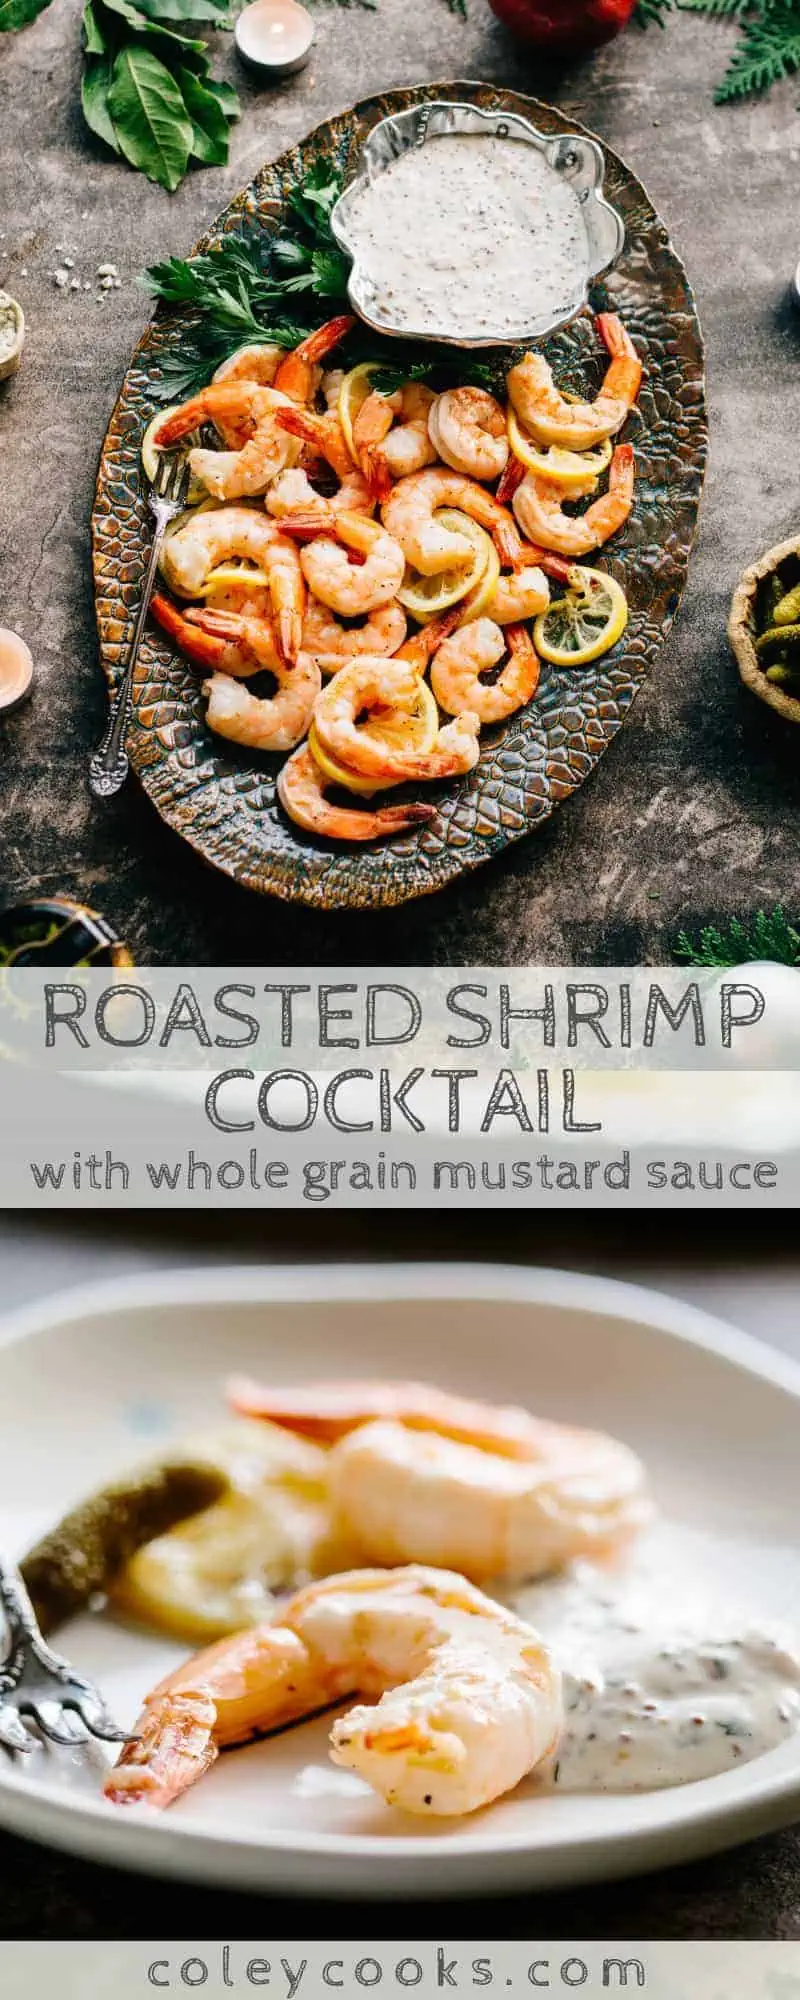 Roasted Shrimp Cocktail with Whole Grain Mustard Sauce | This super easy recipe is a unique twist on shrimp cocktail! Perfect recipe for holiday entertaining! #christmas #shrimp #shrimpcocktail #christmaseve #7fishes #recipe #easy | ColeyCooks.com